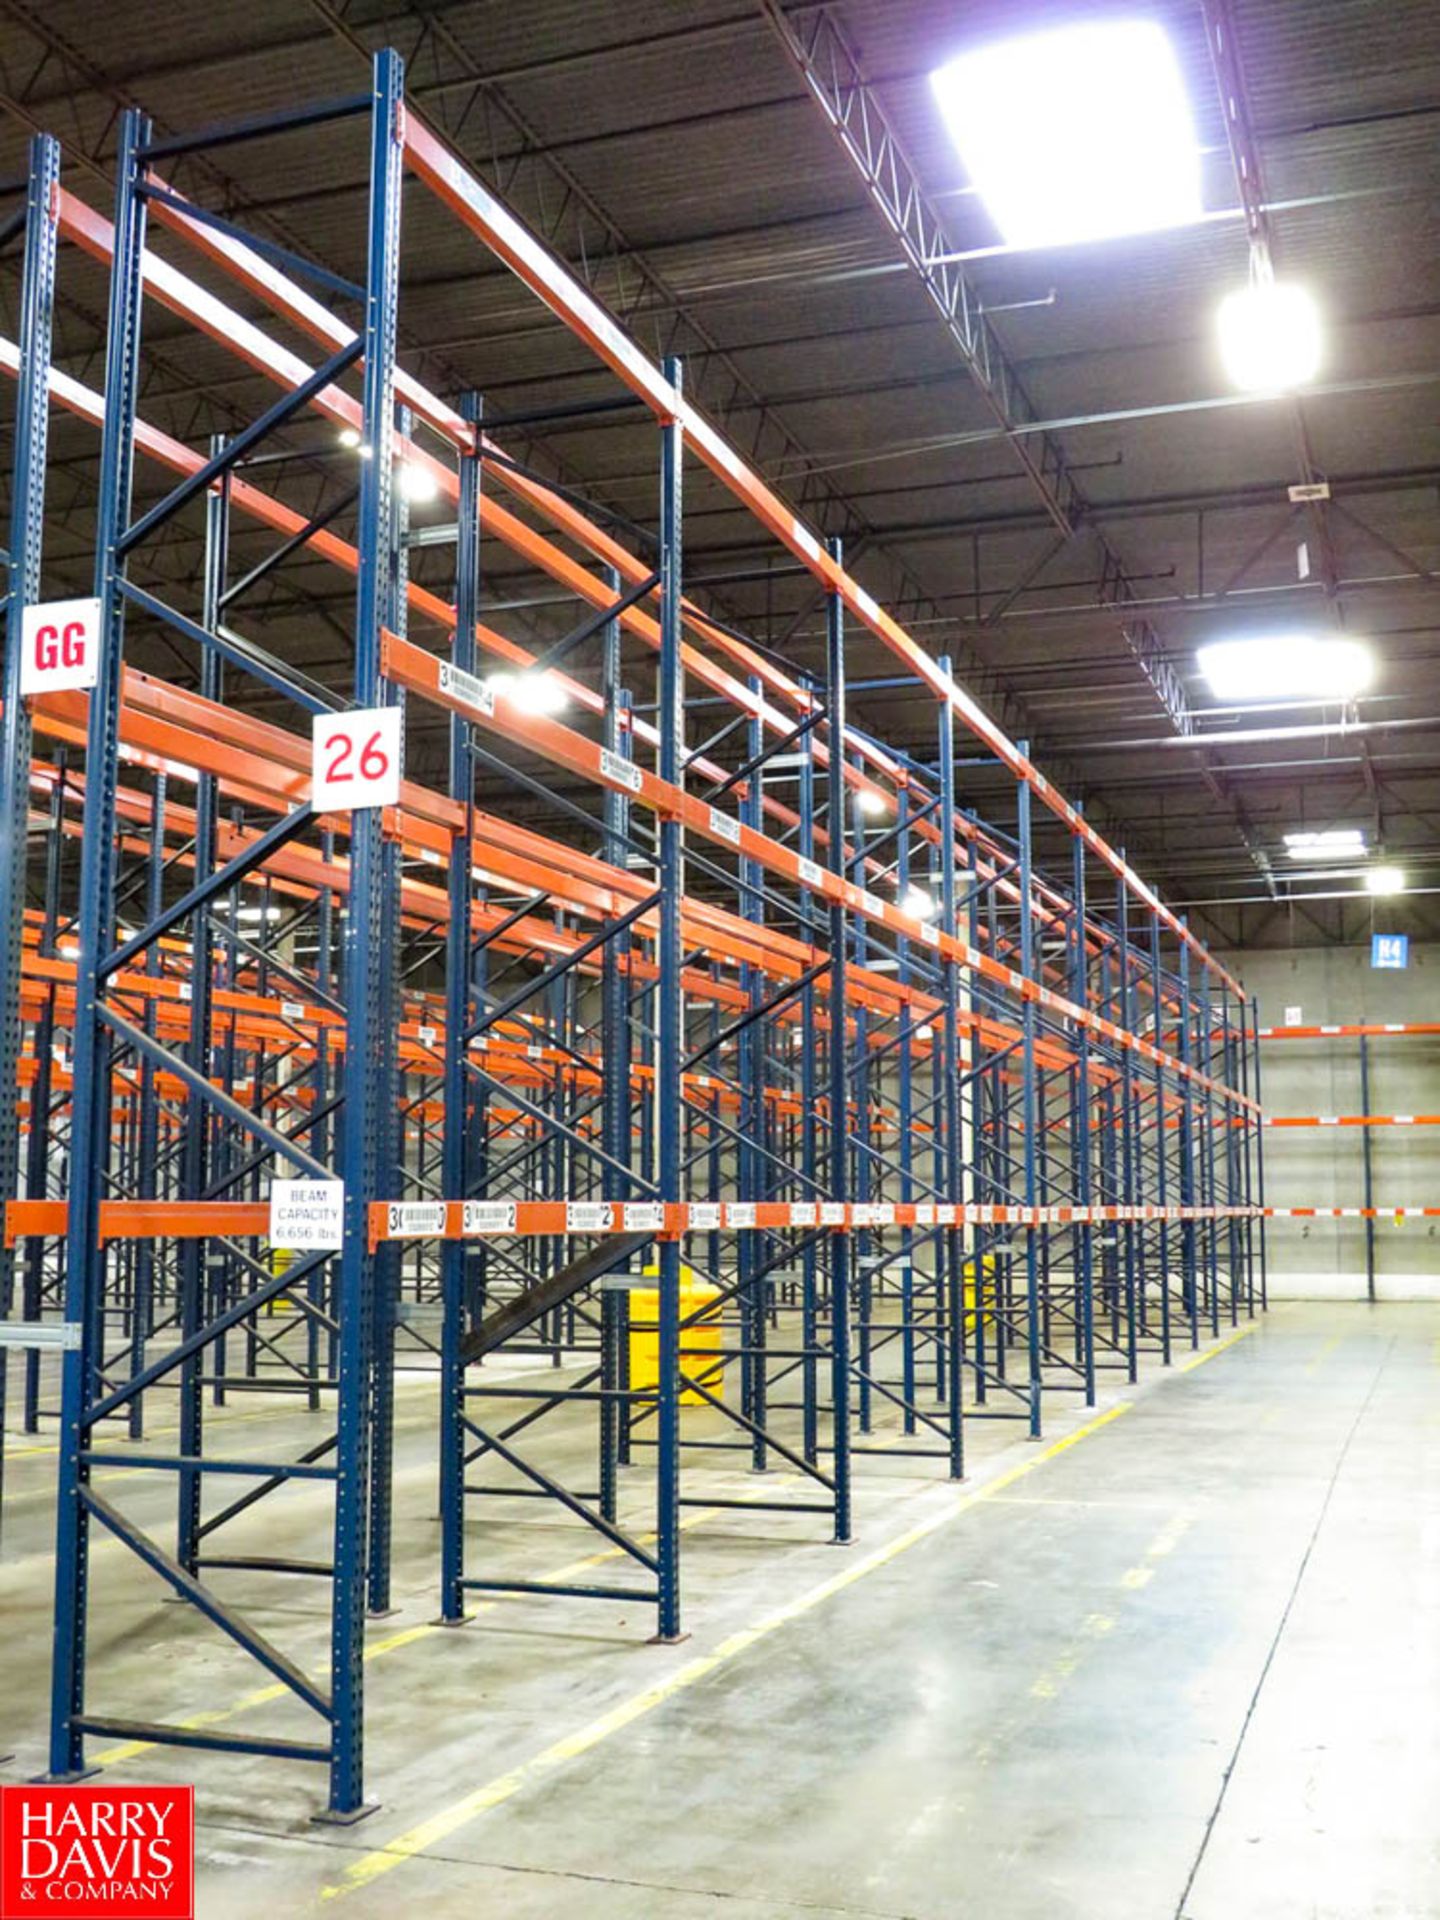 Sections of Pallet Racking to Include: (26) 18' Uprights, (144) 8' Horizontals